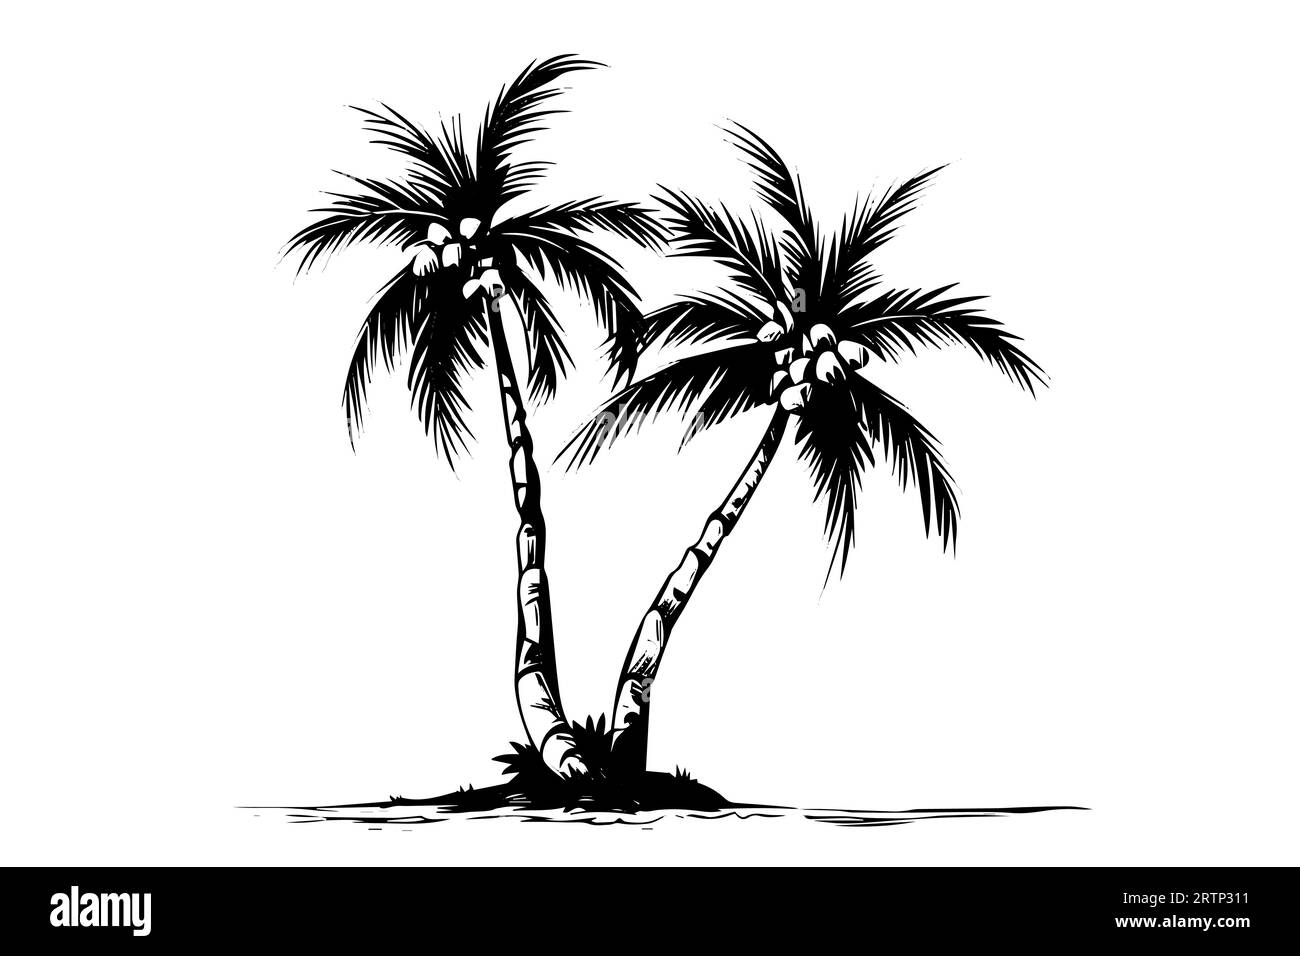 Palm Tree Drawing Pencil Stock Illustrations – 1,019 Palm Tree Drawing  Pencil Stock Illustrations, Vectors & Clipart - Dreamstime